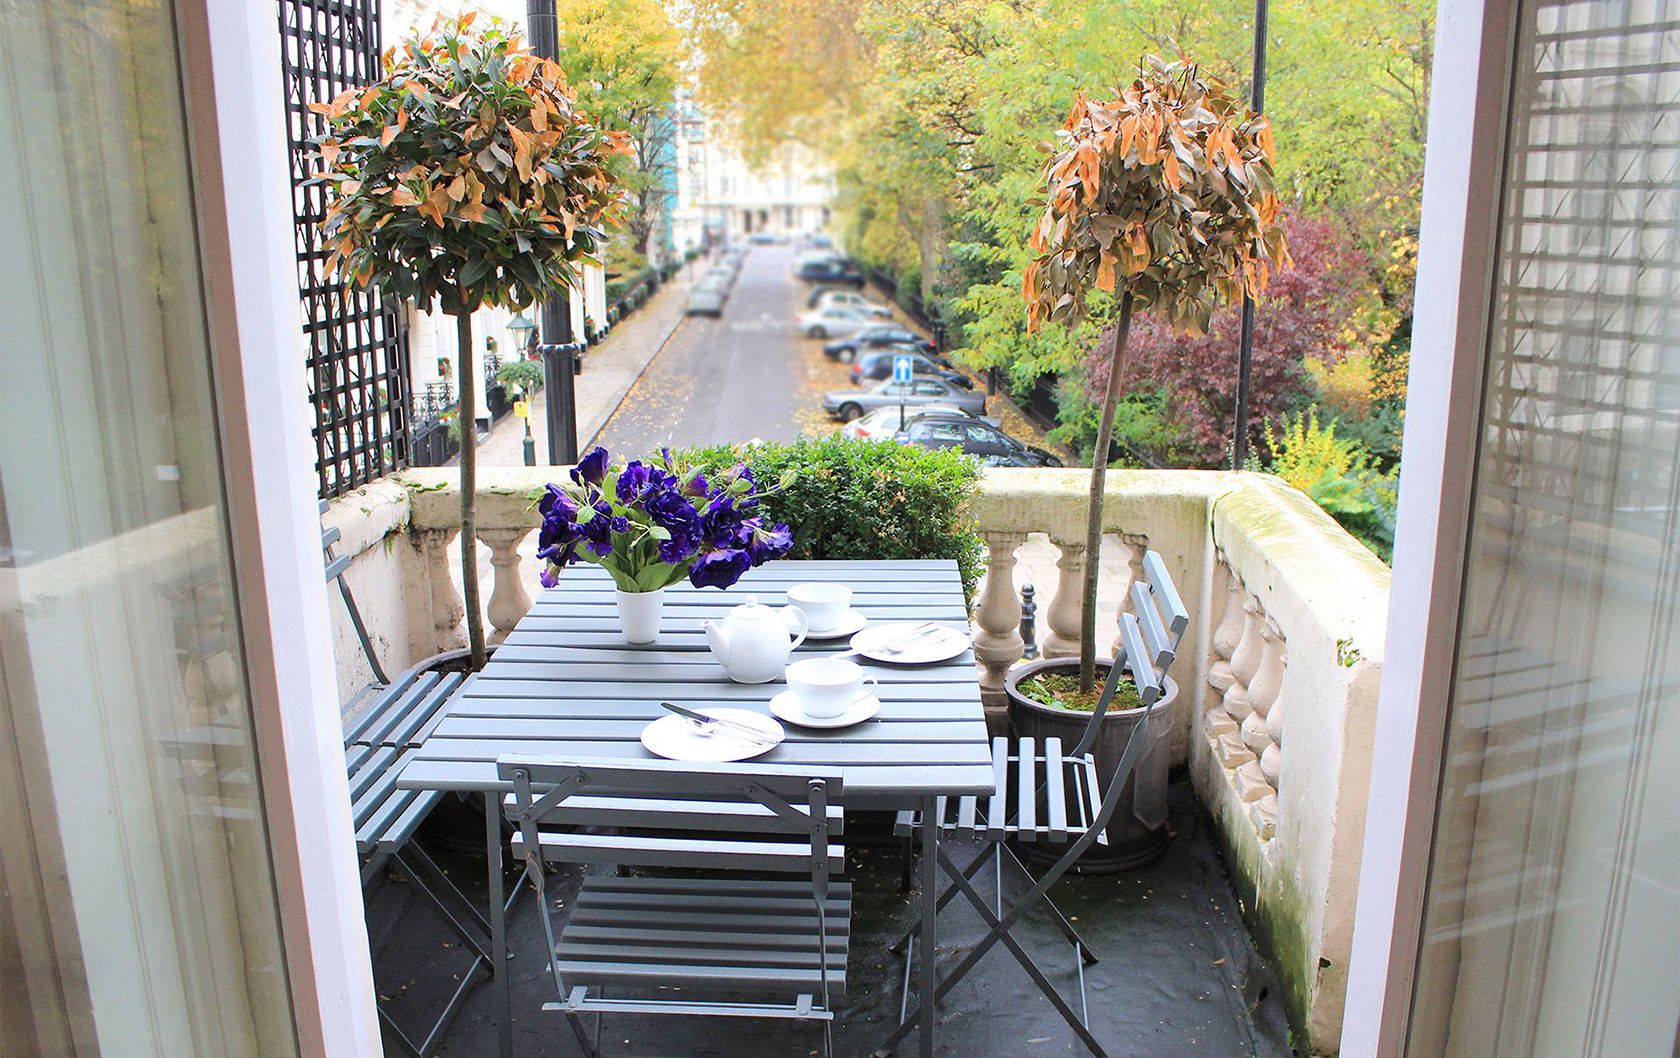 Classic London charm overlooking a garden square from the Salisbury